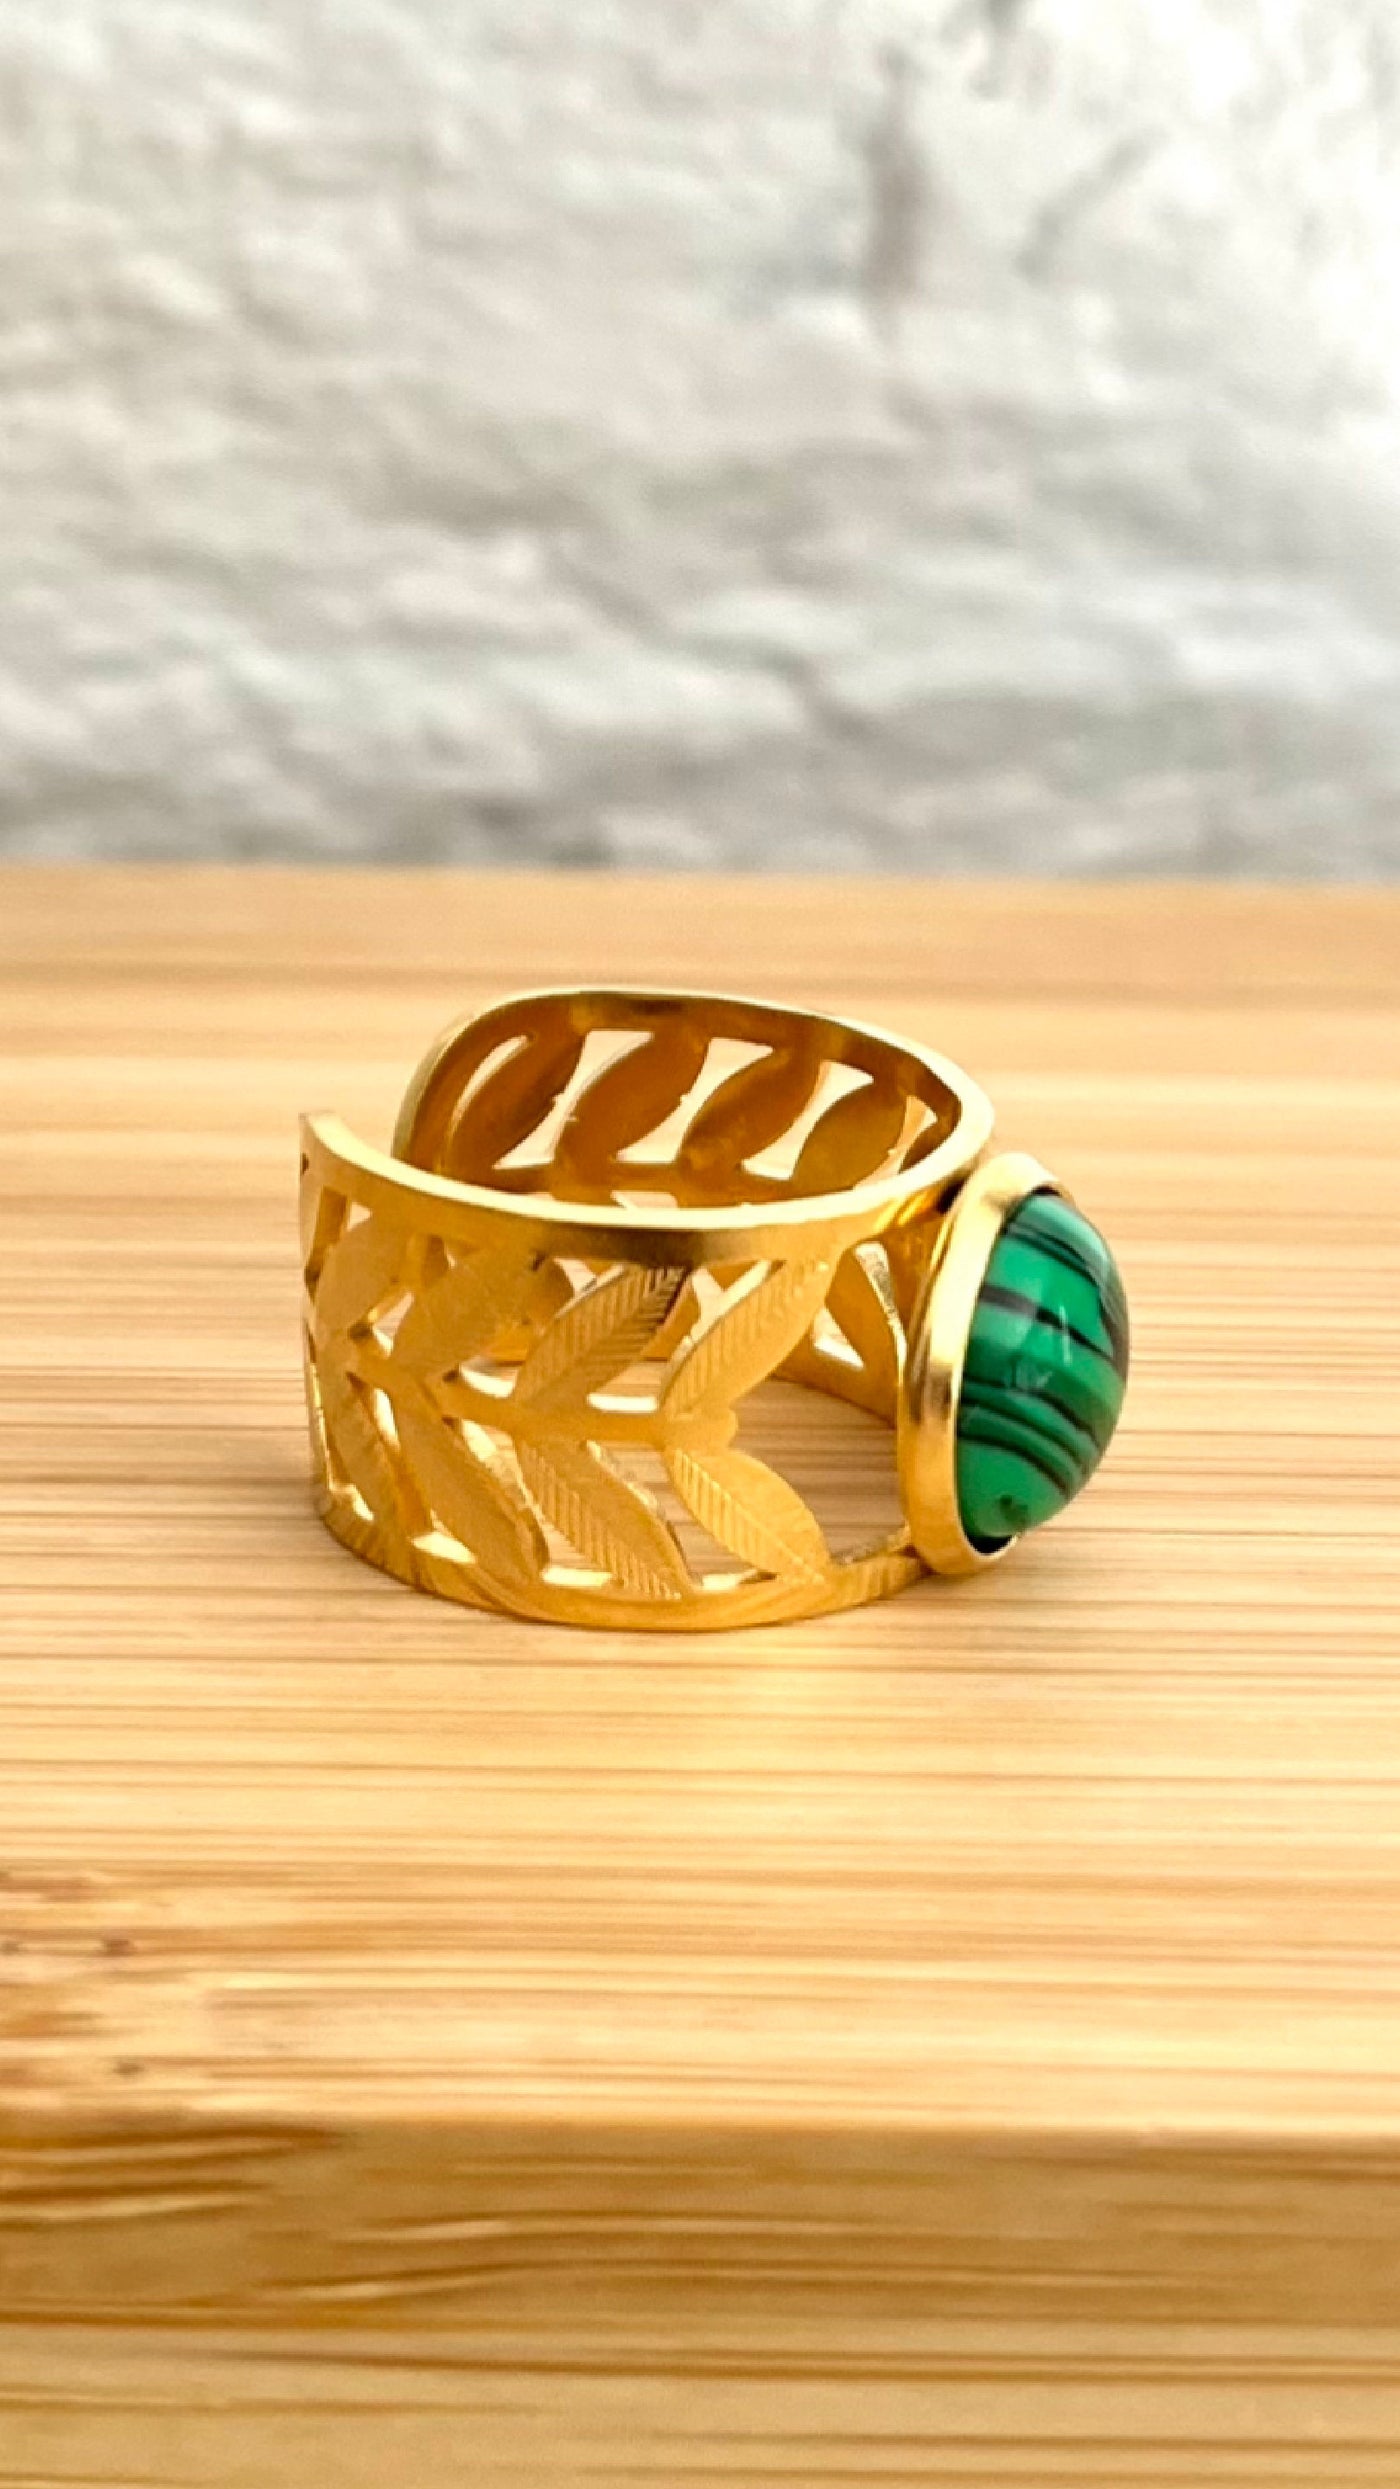 Green Tiger Eye Ring - Piper and Hollow Boutique